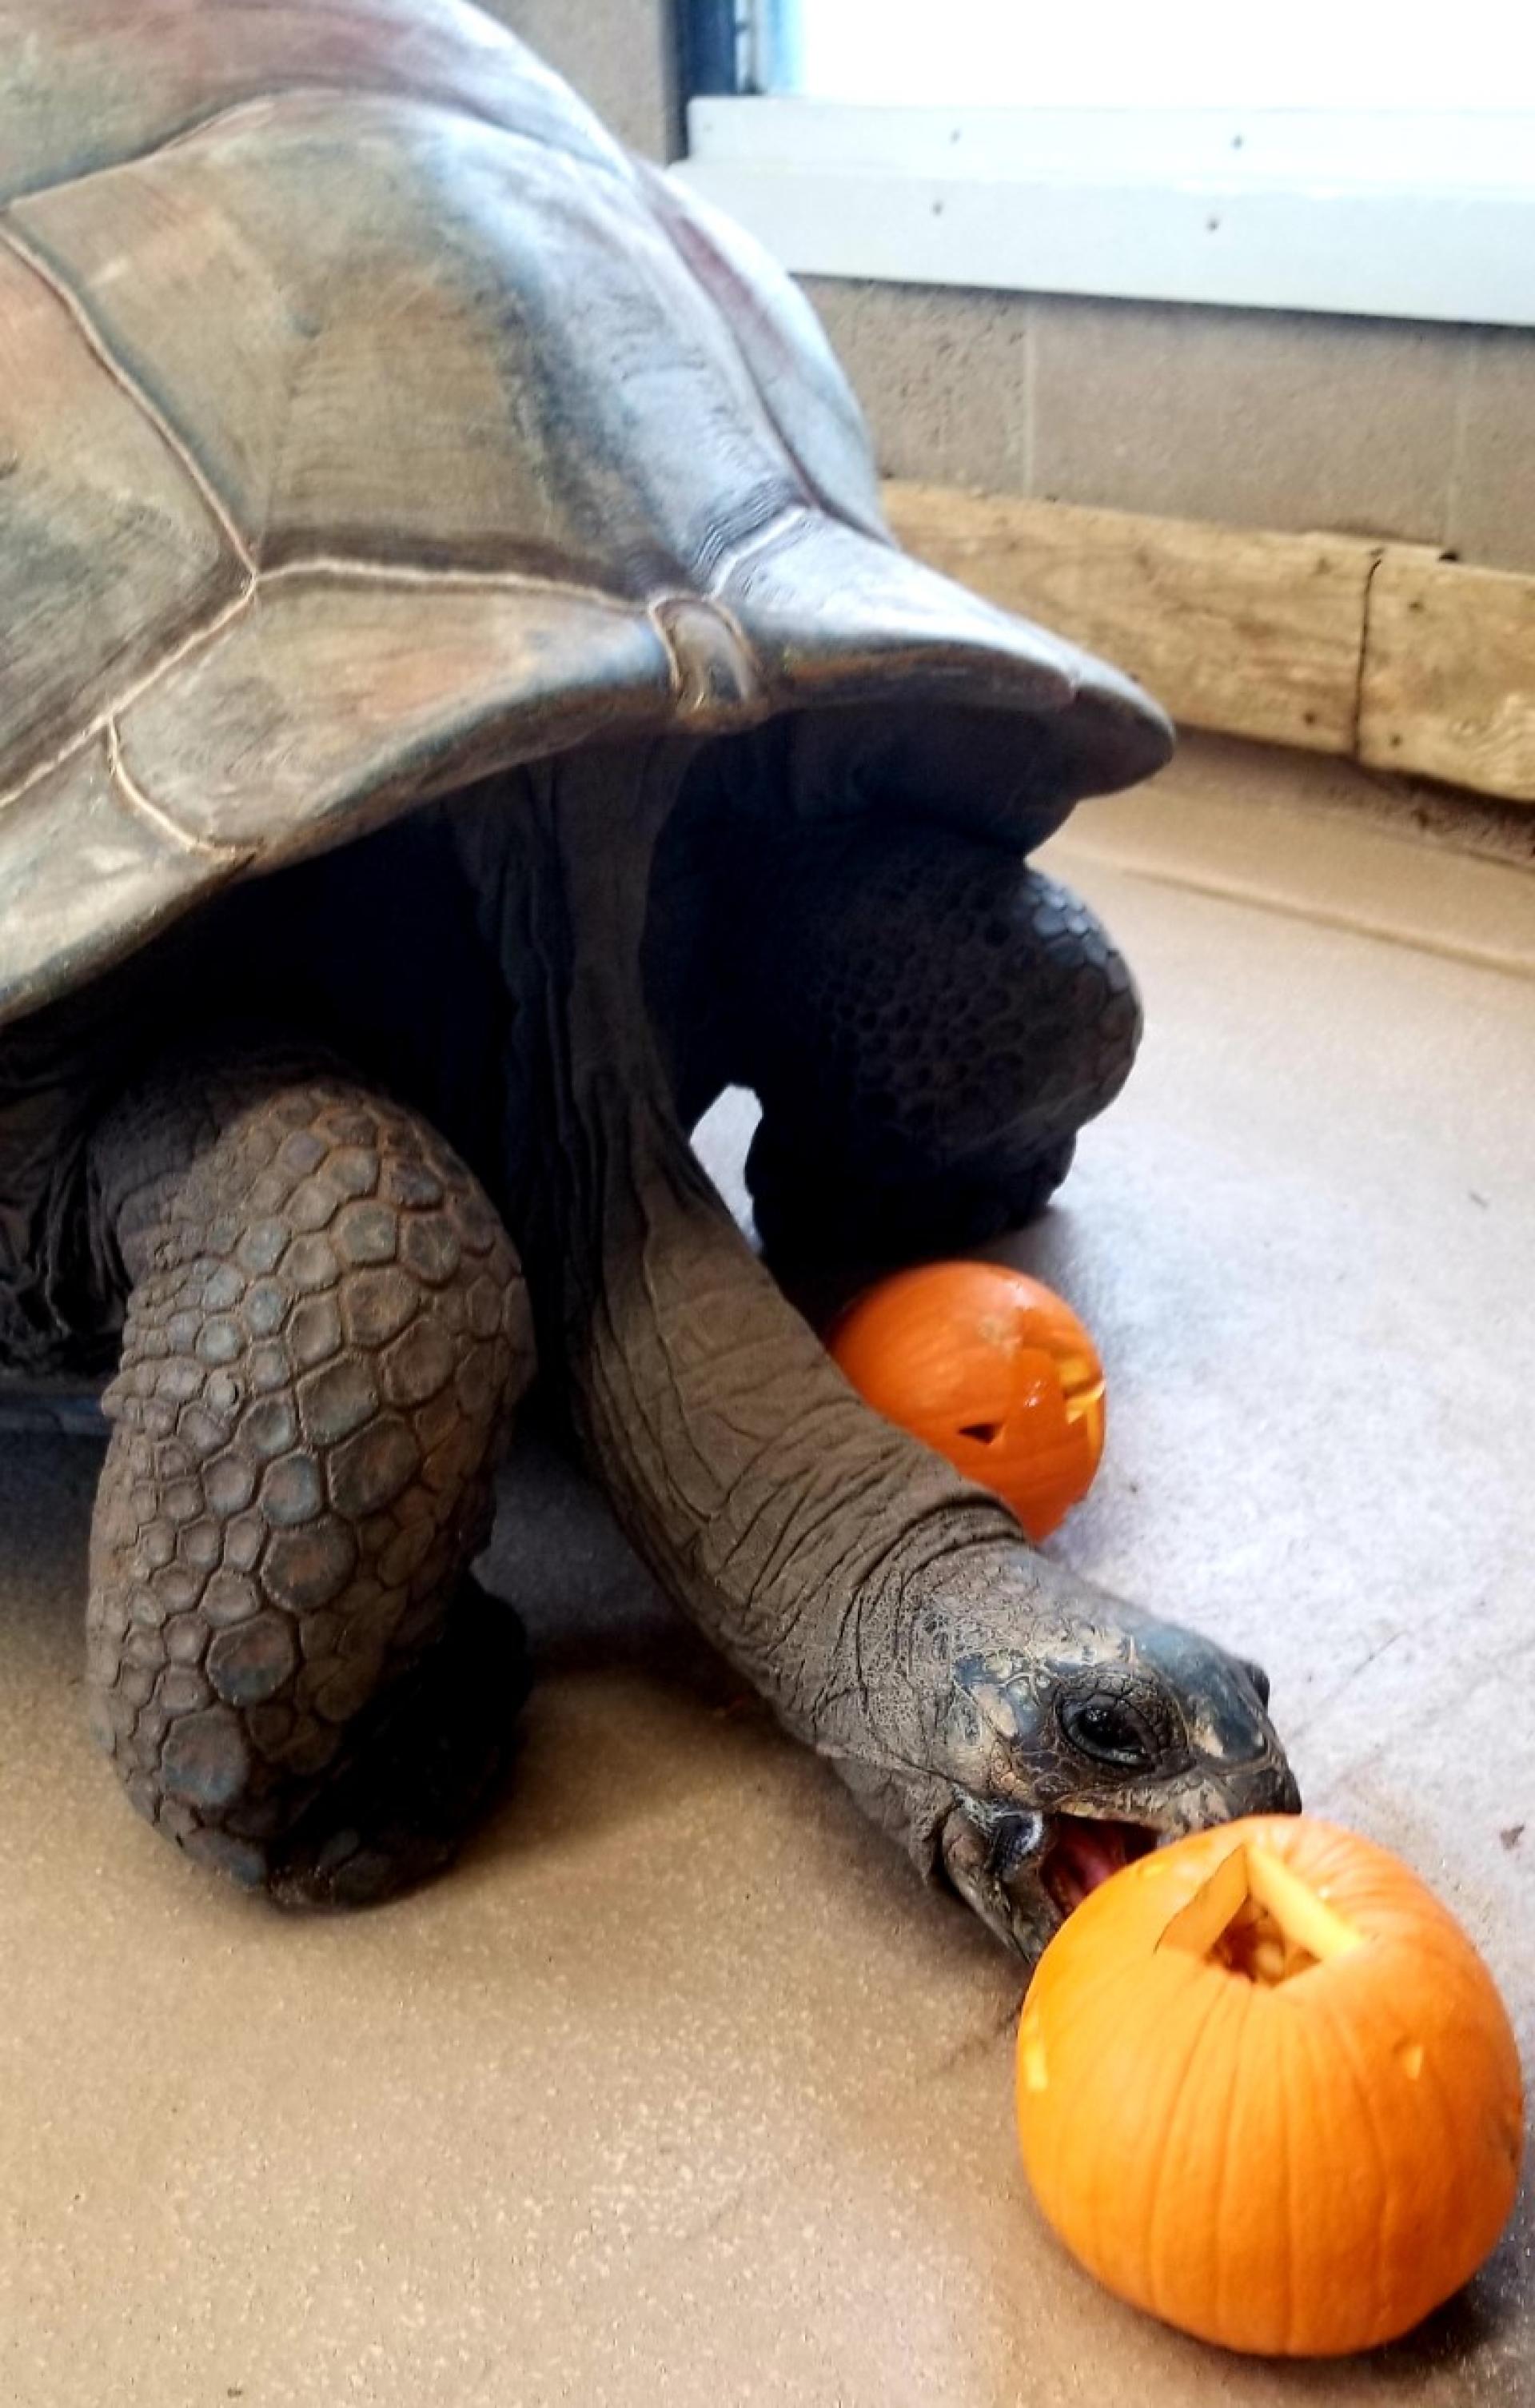 A giant tortoise at the Tulsa Zoo, workplace of North Central College graduate and veteran Eddie Exconde.